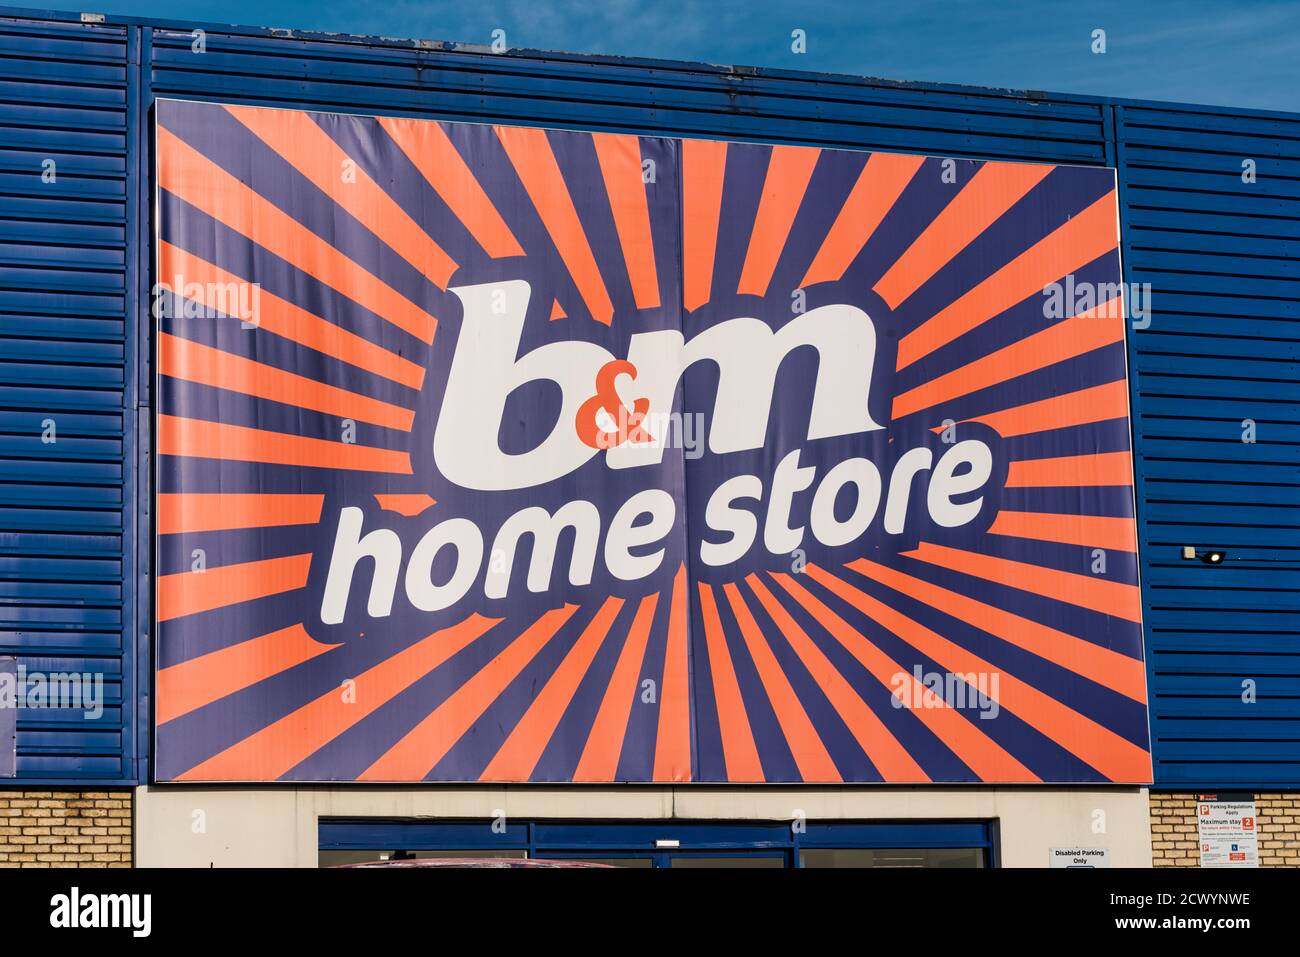 Derry, Northern Ireland- Sept 19, 2020: The front entrance and sign for the B&M Home Store in Derry Northern Ireland. Stock Photo